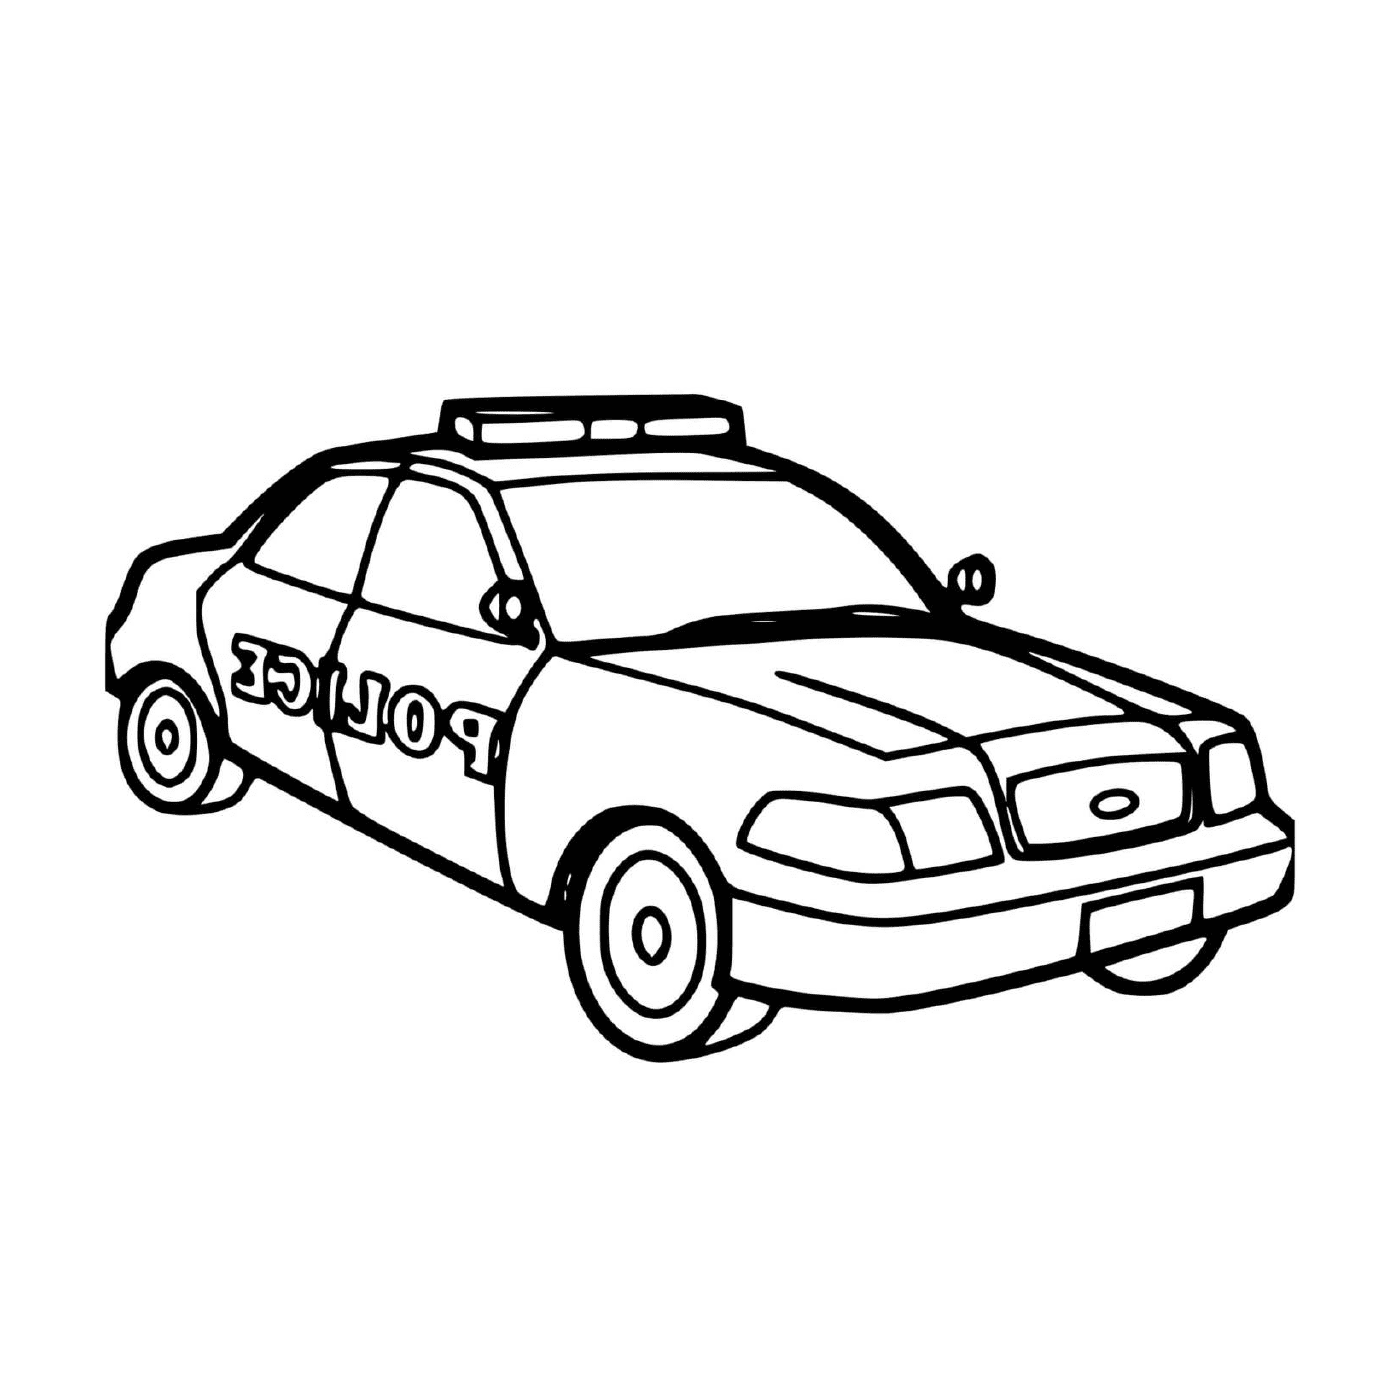  Mother car, US police 